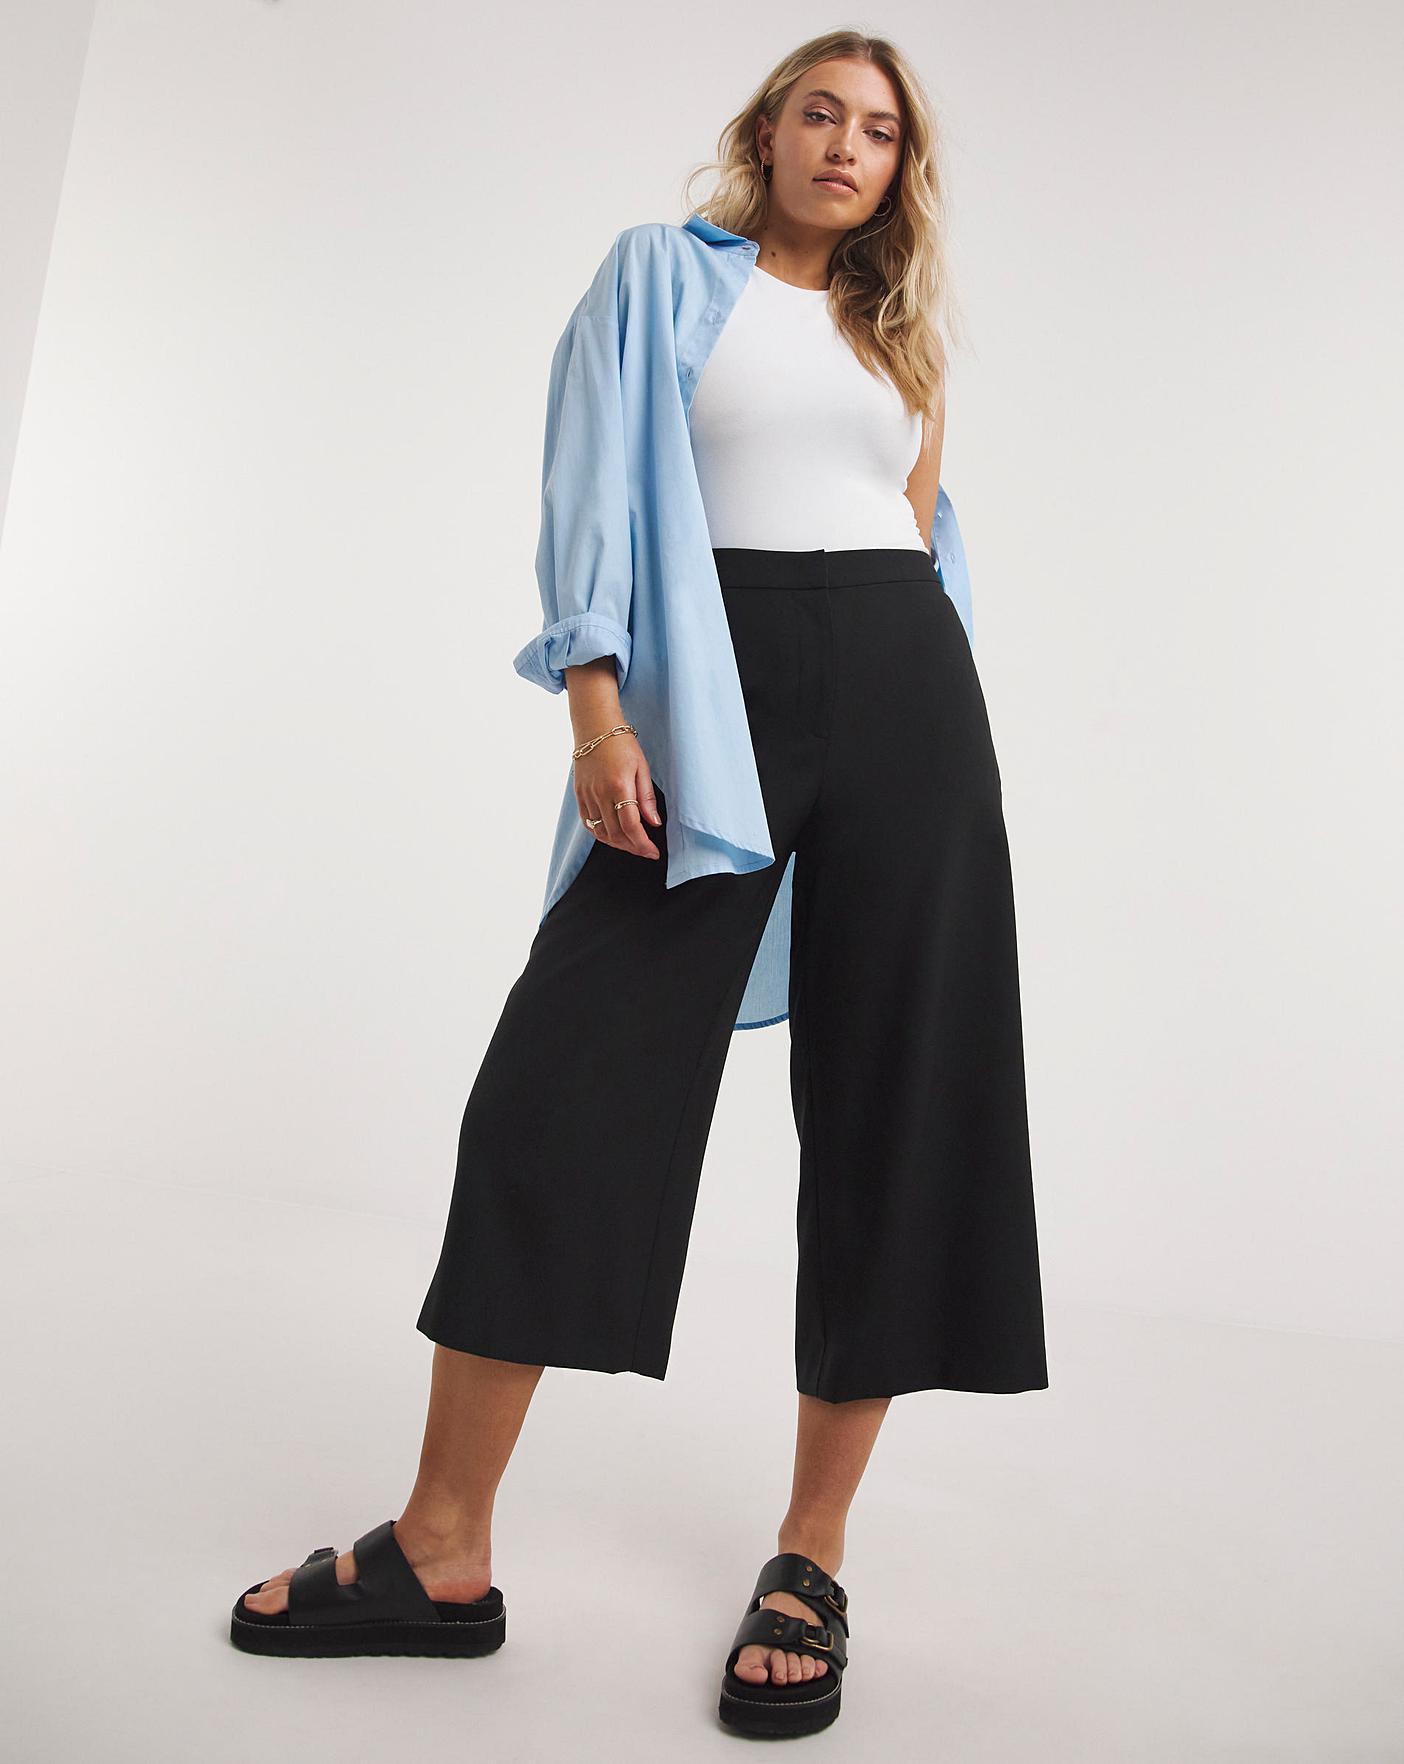 Culotte trousers with elastic waistband in black, 4.99€ | Celestino